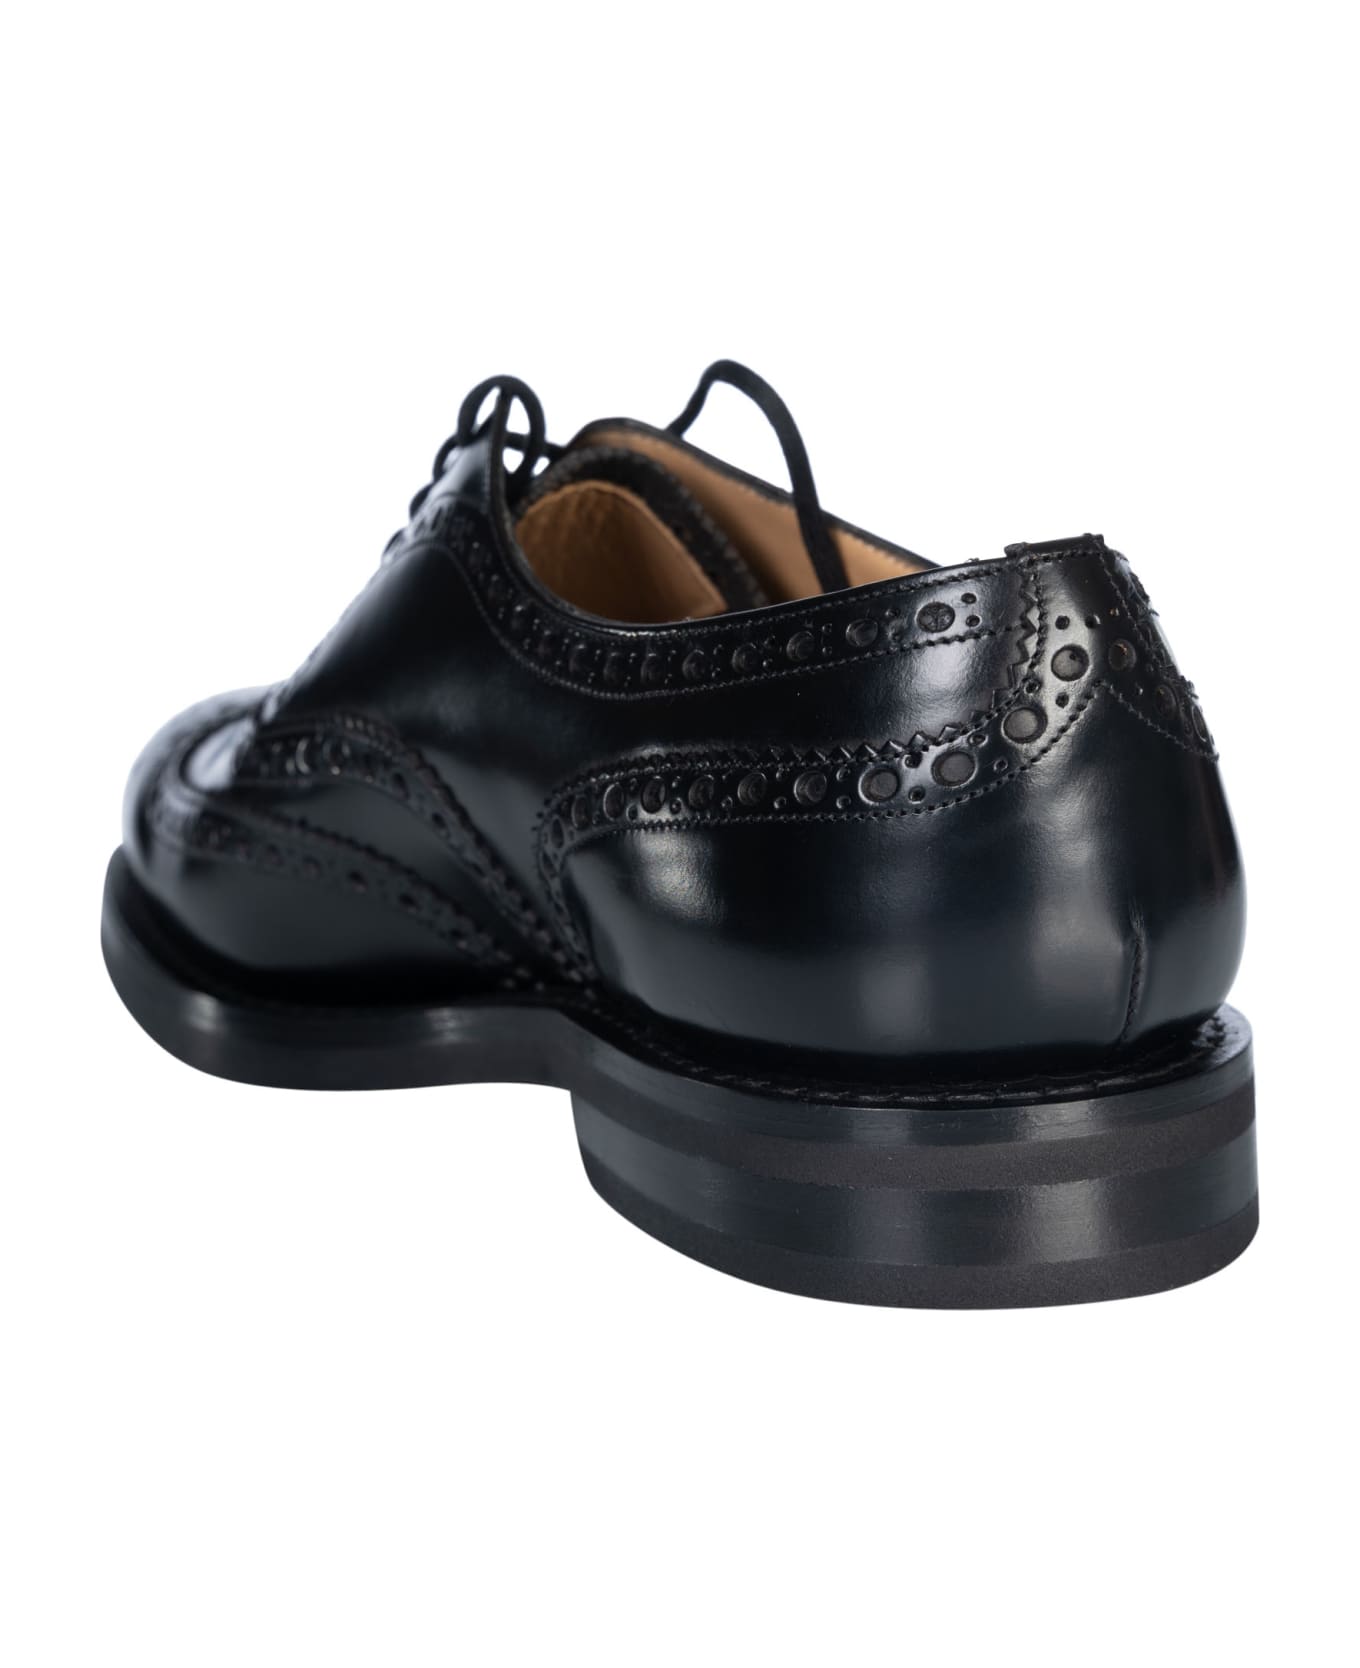 Church's Classic Lace-up Derby Innocence Shoes - Black